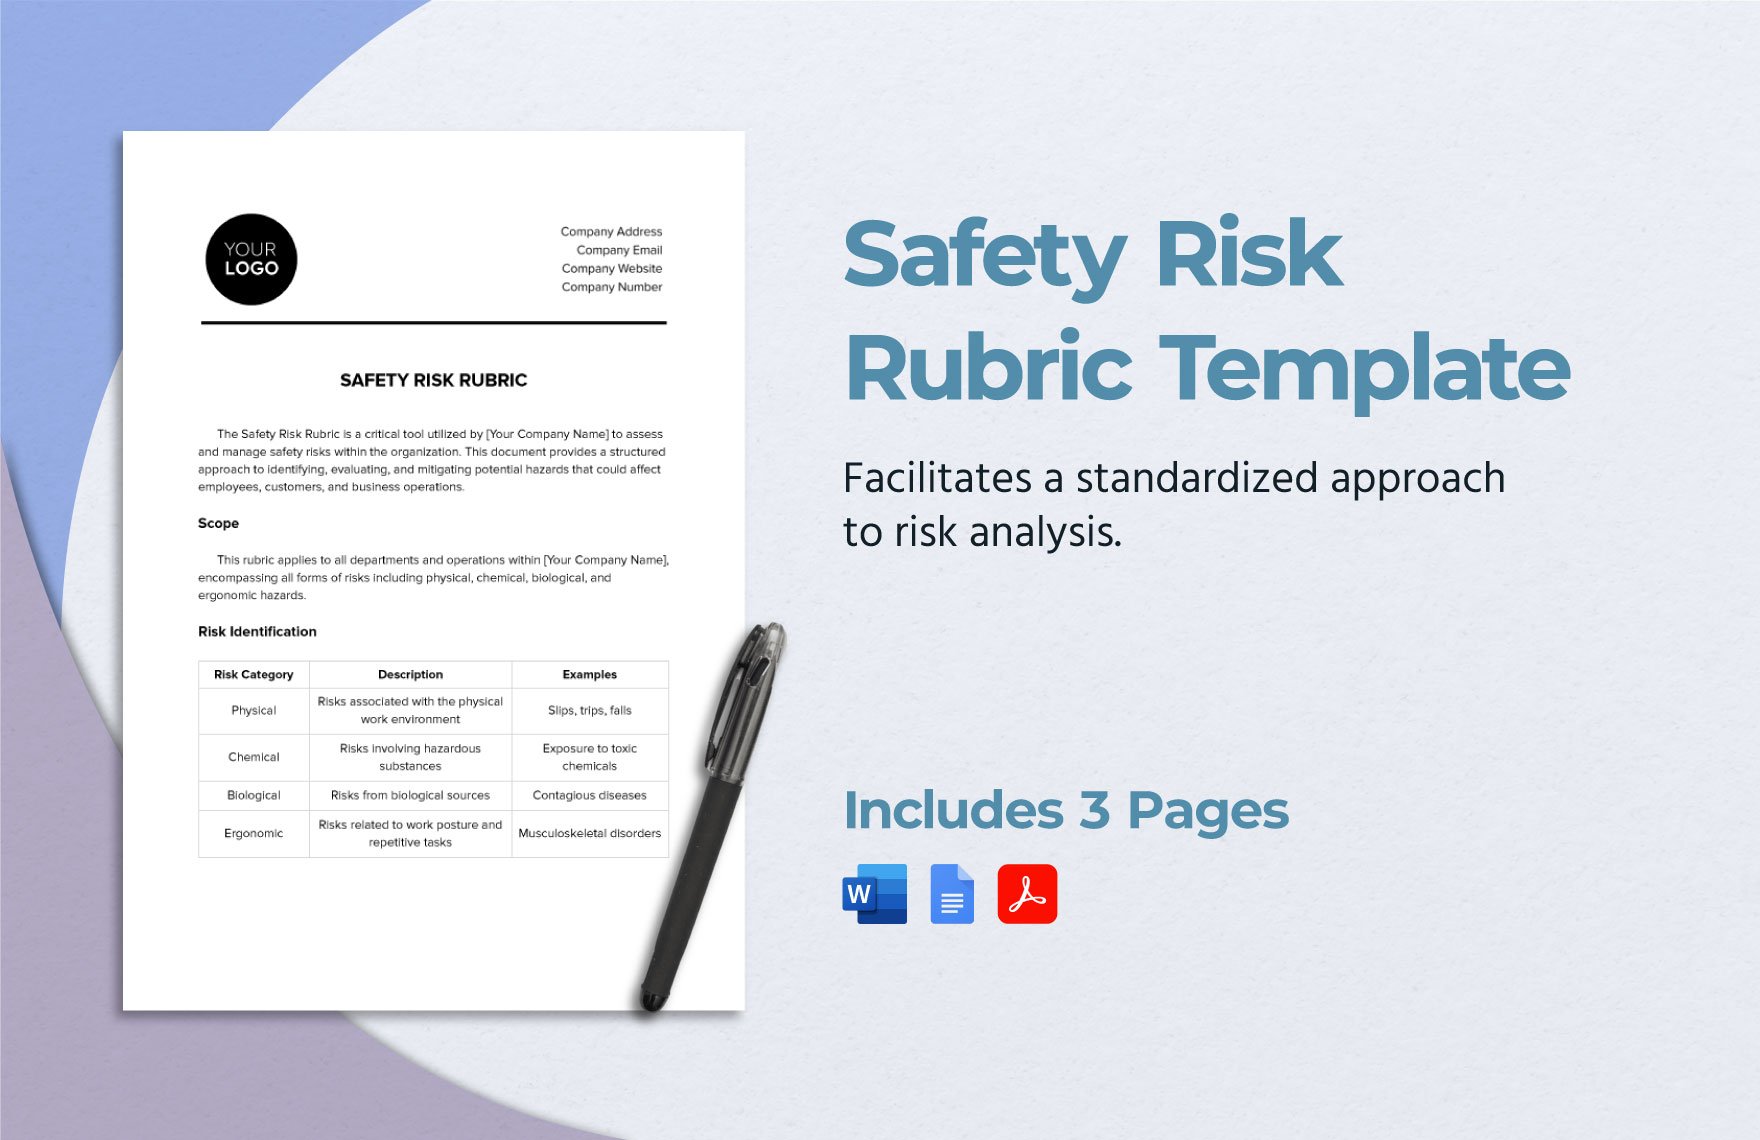 Safety Risk Rubric Template